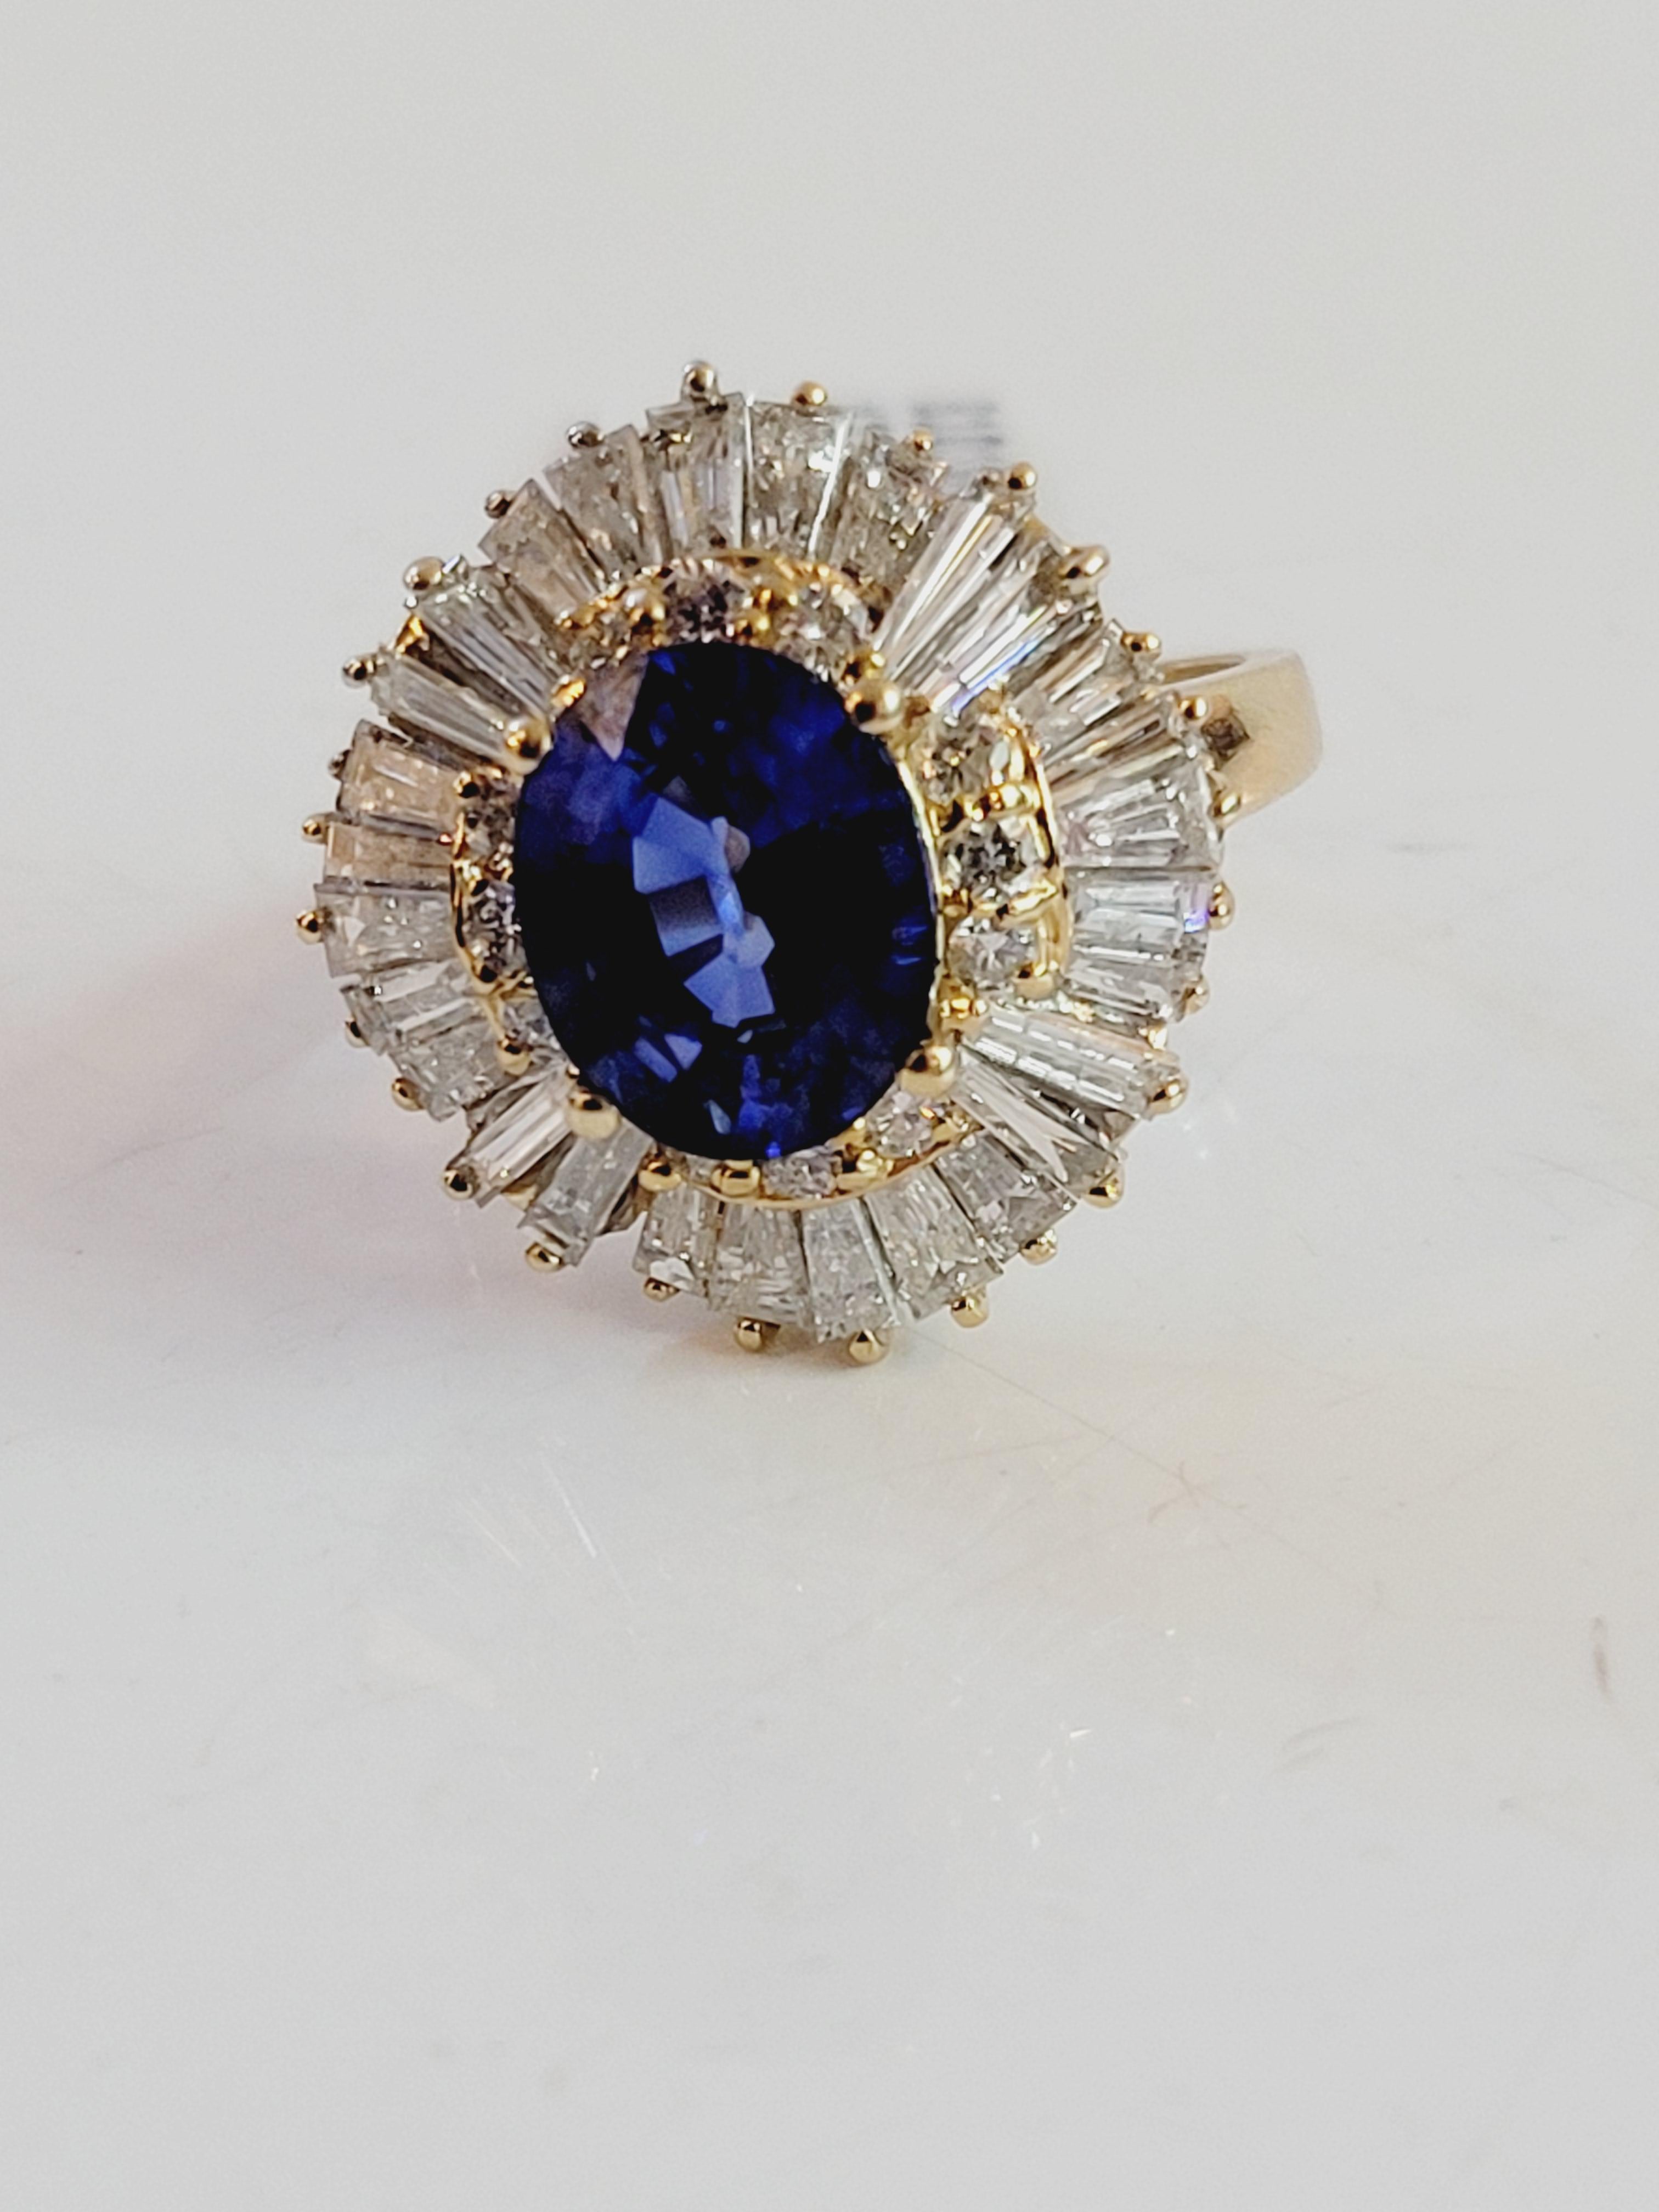 -Custom made
-14k Yellow Gold
-Ring size: 7
-Center Stone Measurement: 10 x 8mm
-Blue Sapphire (Heated): 2.5 ct
-Diamond: 1.93ct, VS1 clarity, D color
-Total Weight 8.00 Grams
-Retail Price $4379